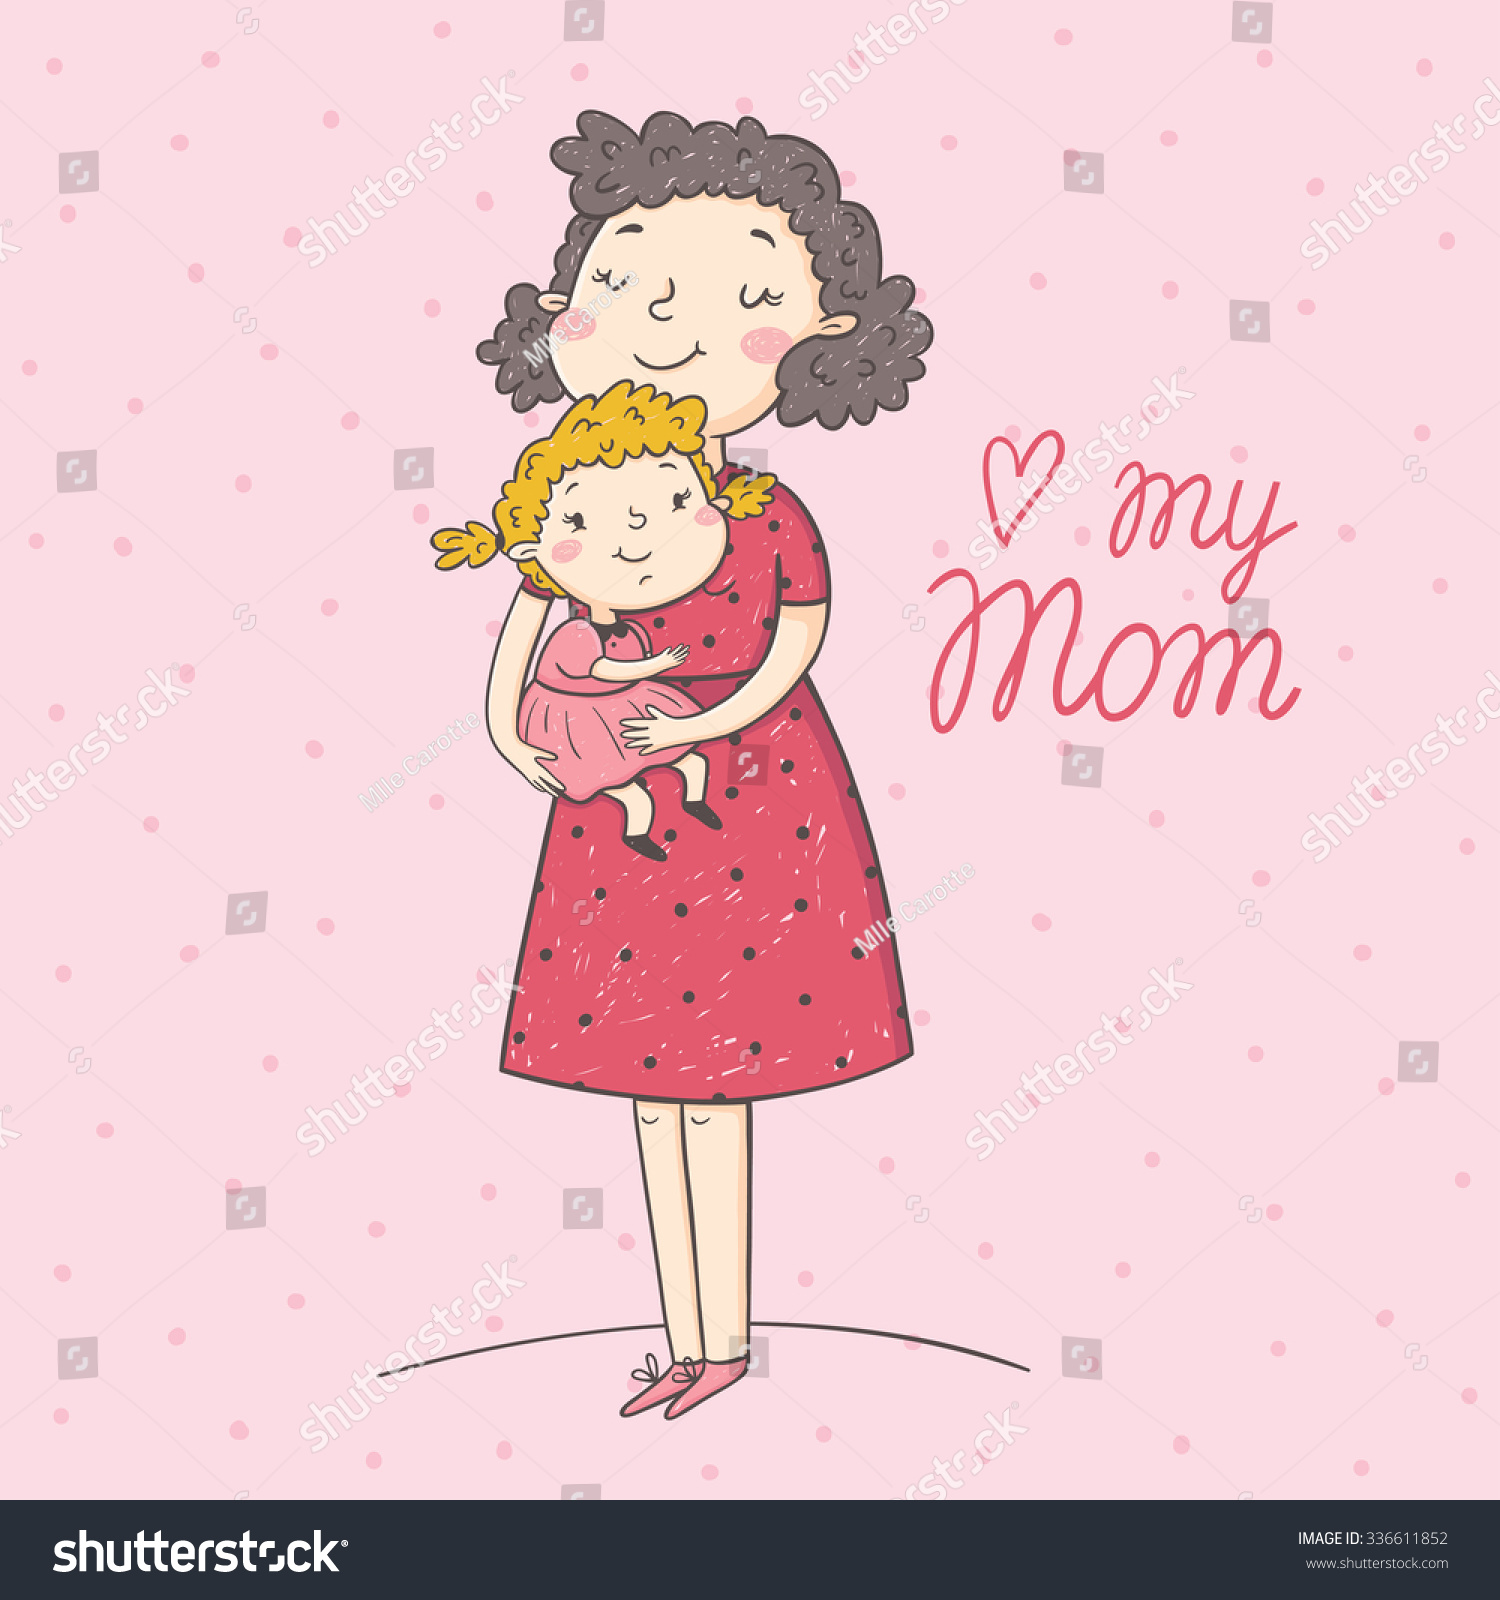 Daughter mothers перевод. Woman Day mom открытка. Mother and daughter Clipart.